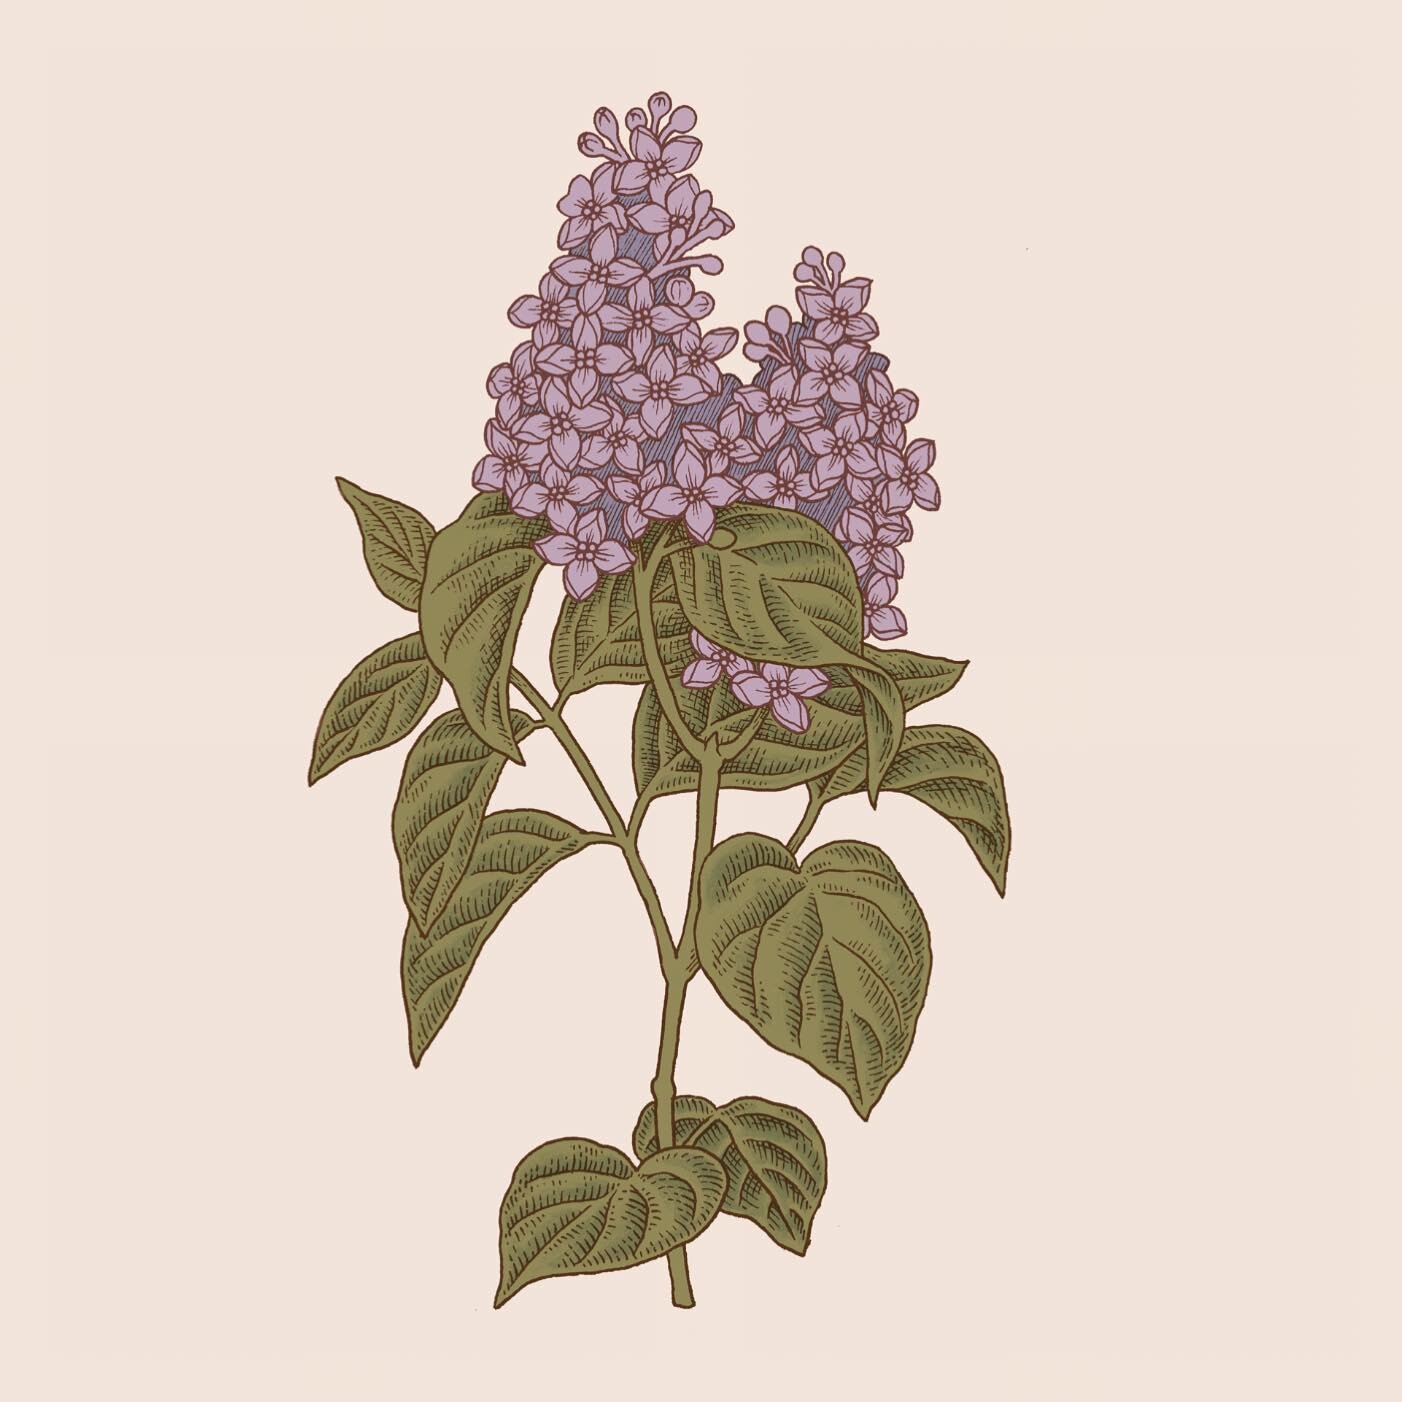 It&rsquo;s lilac season 🥲 and to celebrate I&rsquo;ve made some prints of this pretty little lilac illustration. Now available in the sh/op AND get free shipping on orders over $2O this week only with code SHIP20 🌸 you know where the 🔗 lives!

#bo